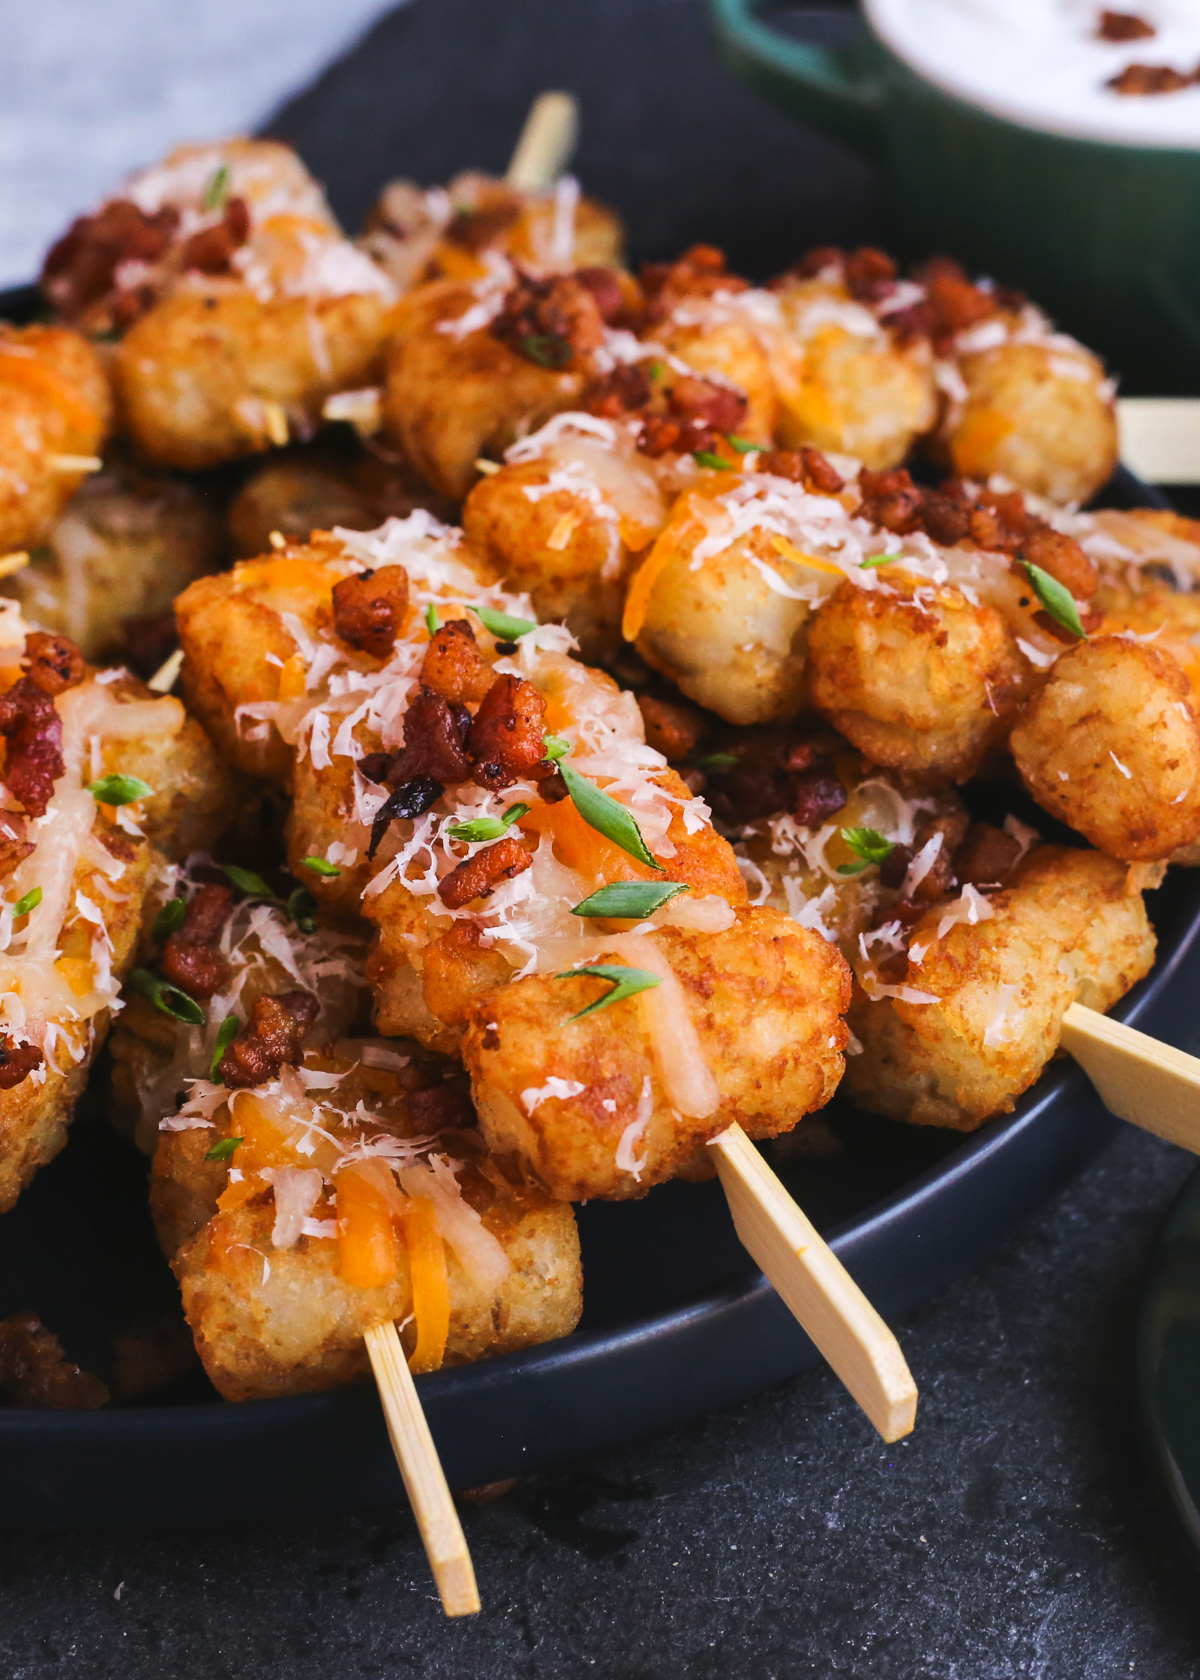 A stack of loaded tater tots on short wooden skewers is piled in a circular formation on a serving plate, with melted cheese, crispy bacon bits, and sliced green onions sprinkled over the top